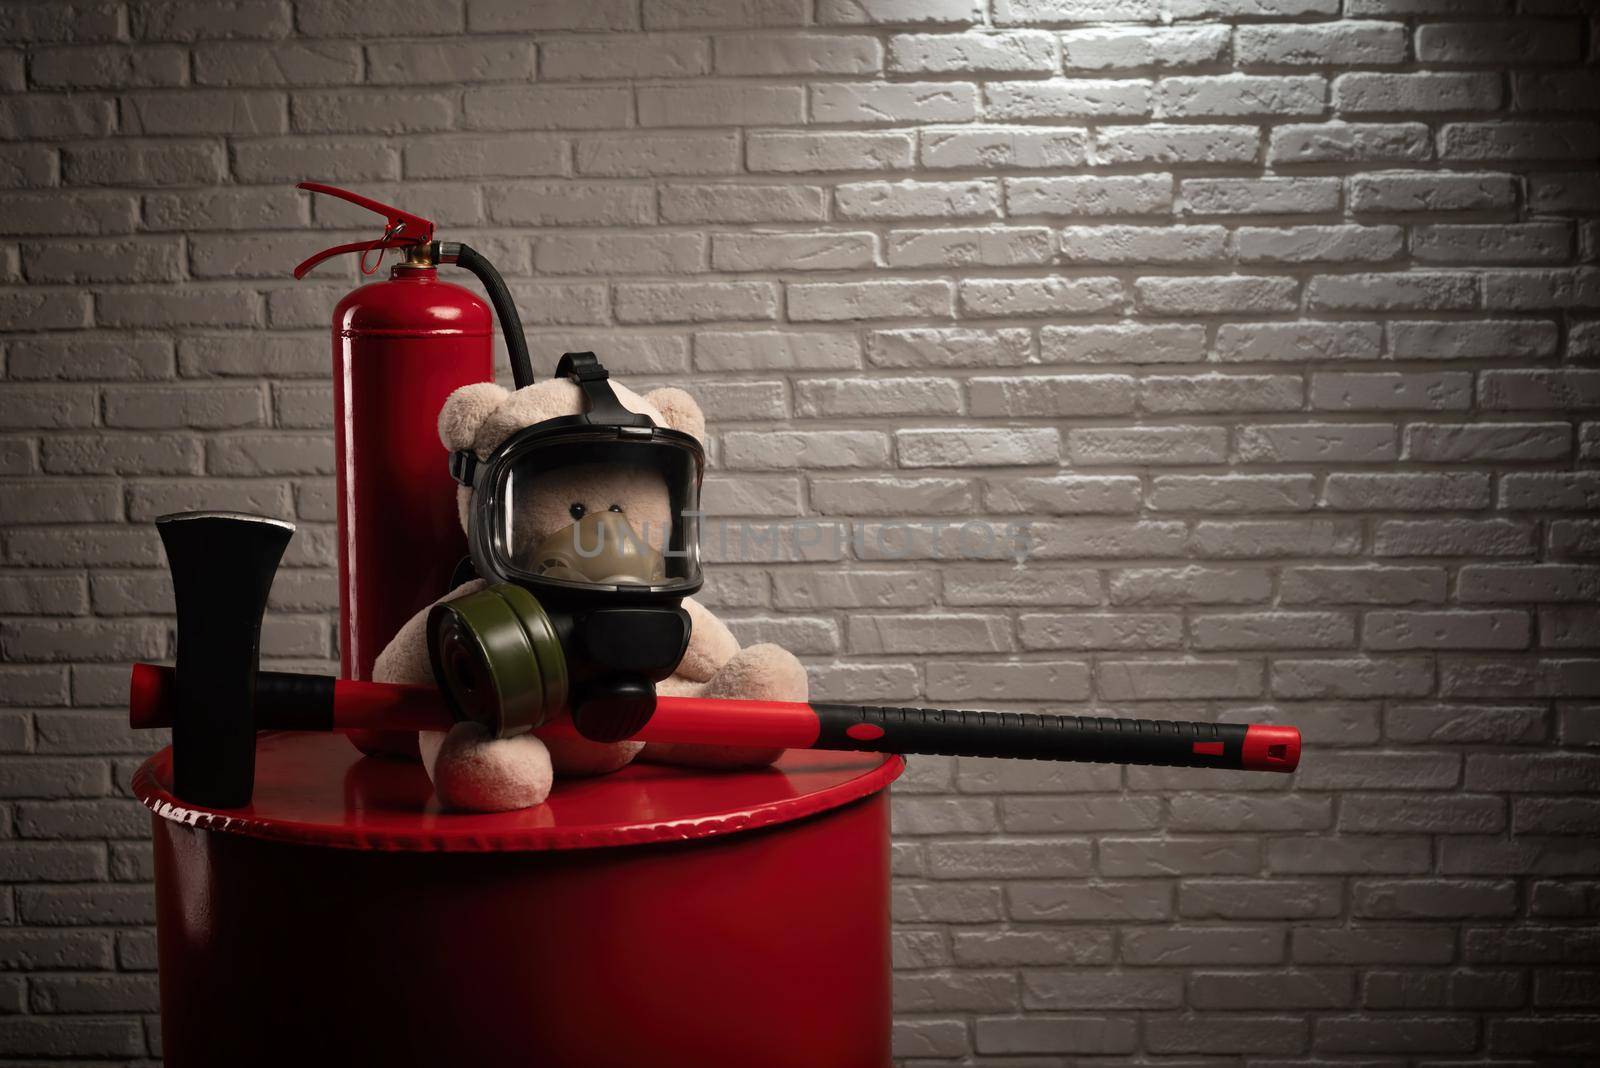 mascot of the fire brigade is a teddy bear in a gas mask with a fire extinguisher and a red axe in smoke